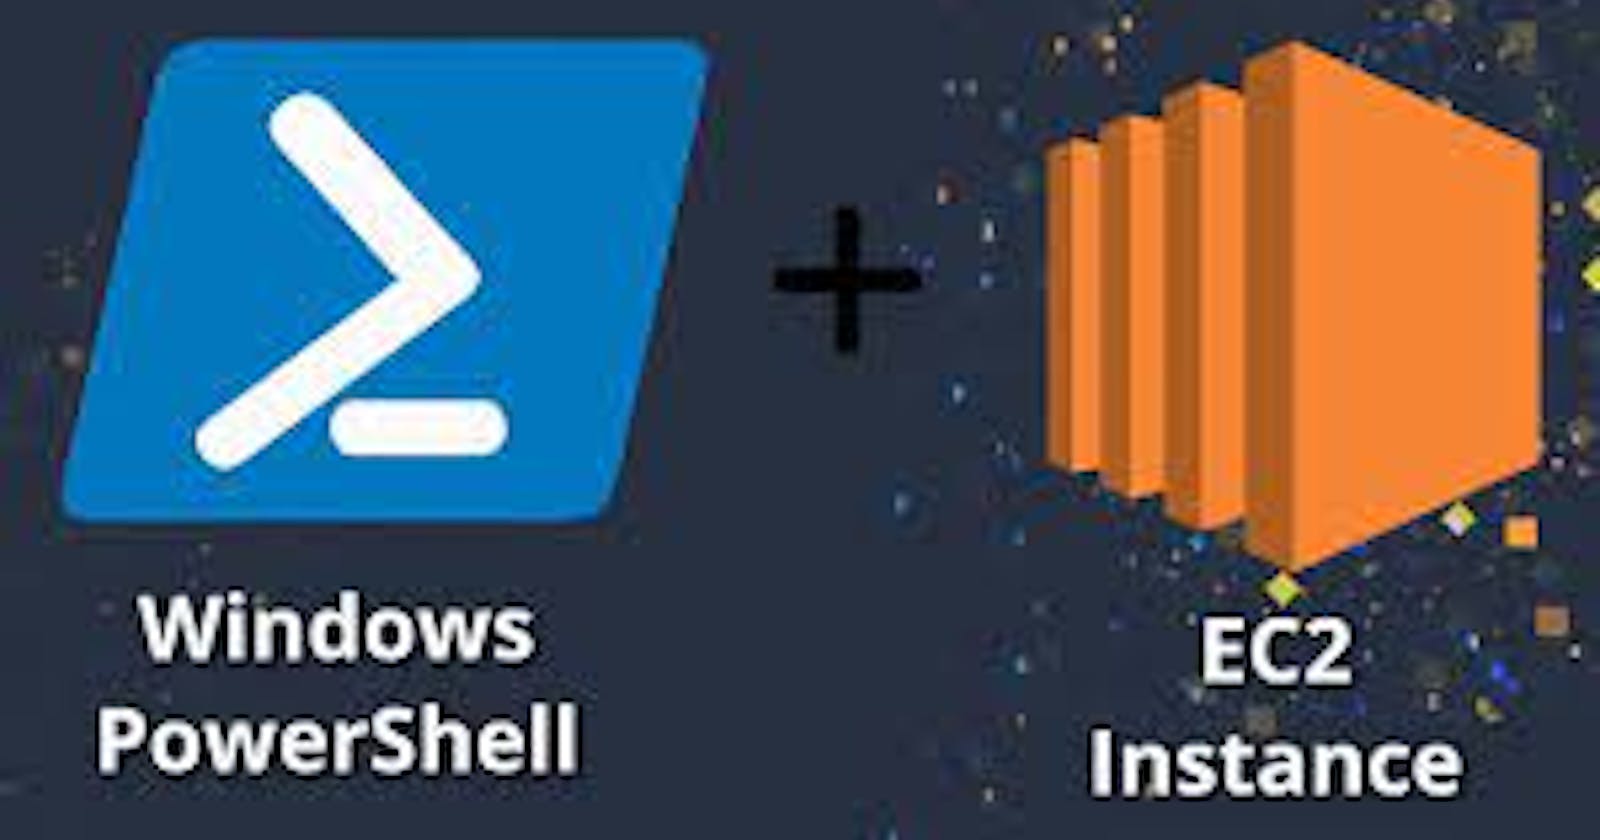 How to SSH into any AWS EC2 Instance using WindowsPowershell or Git Bash